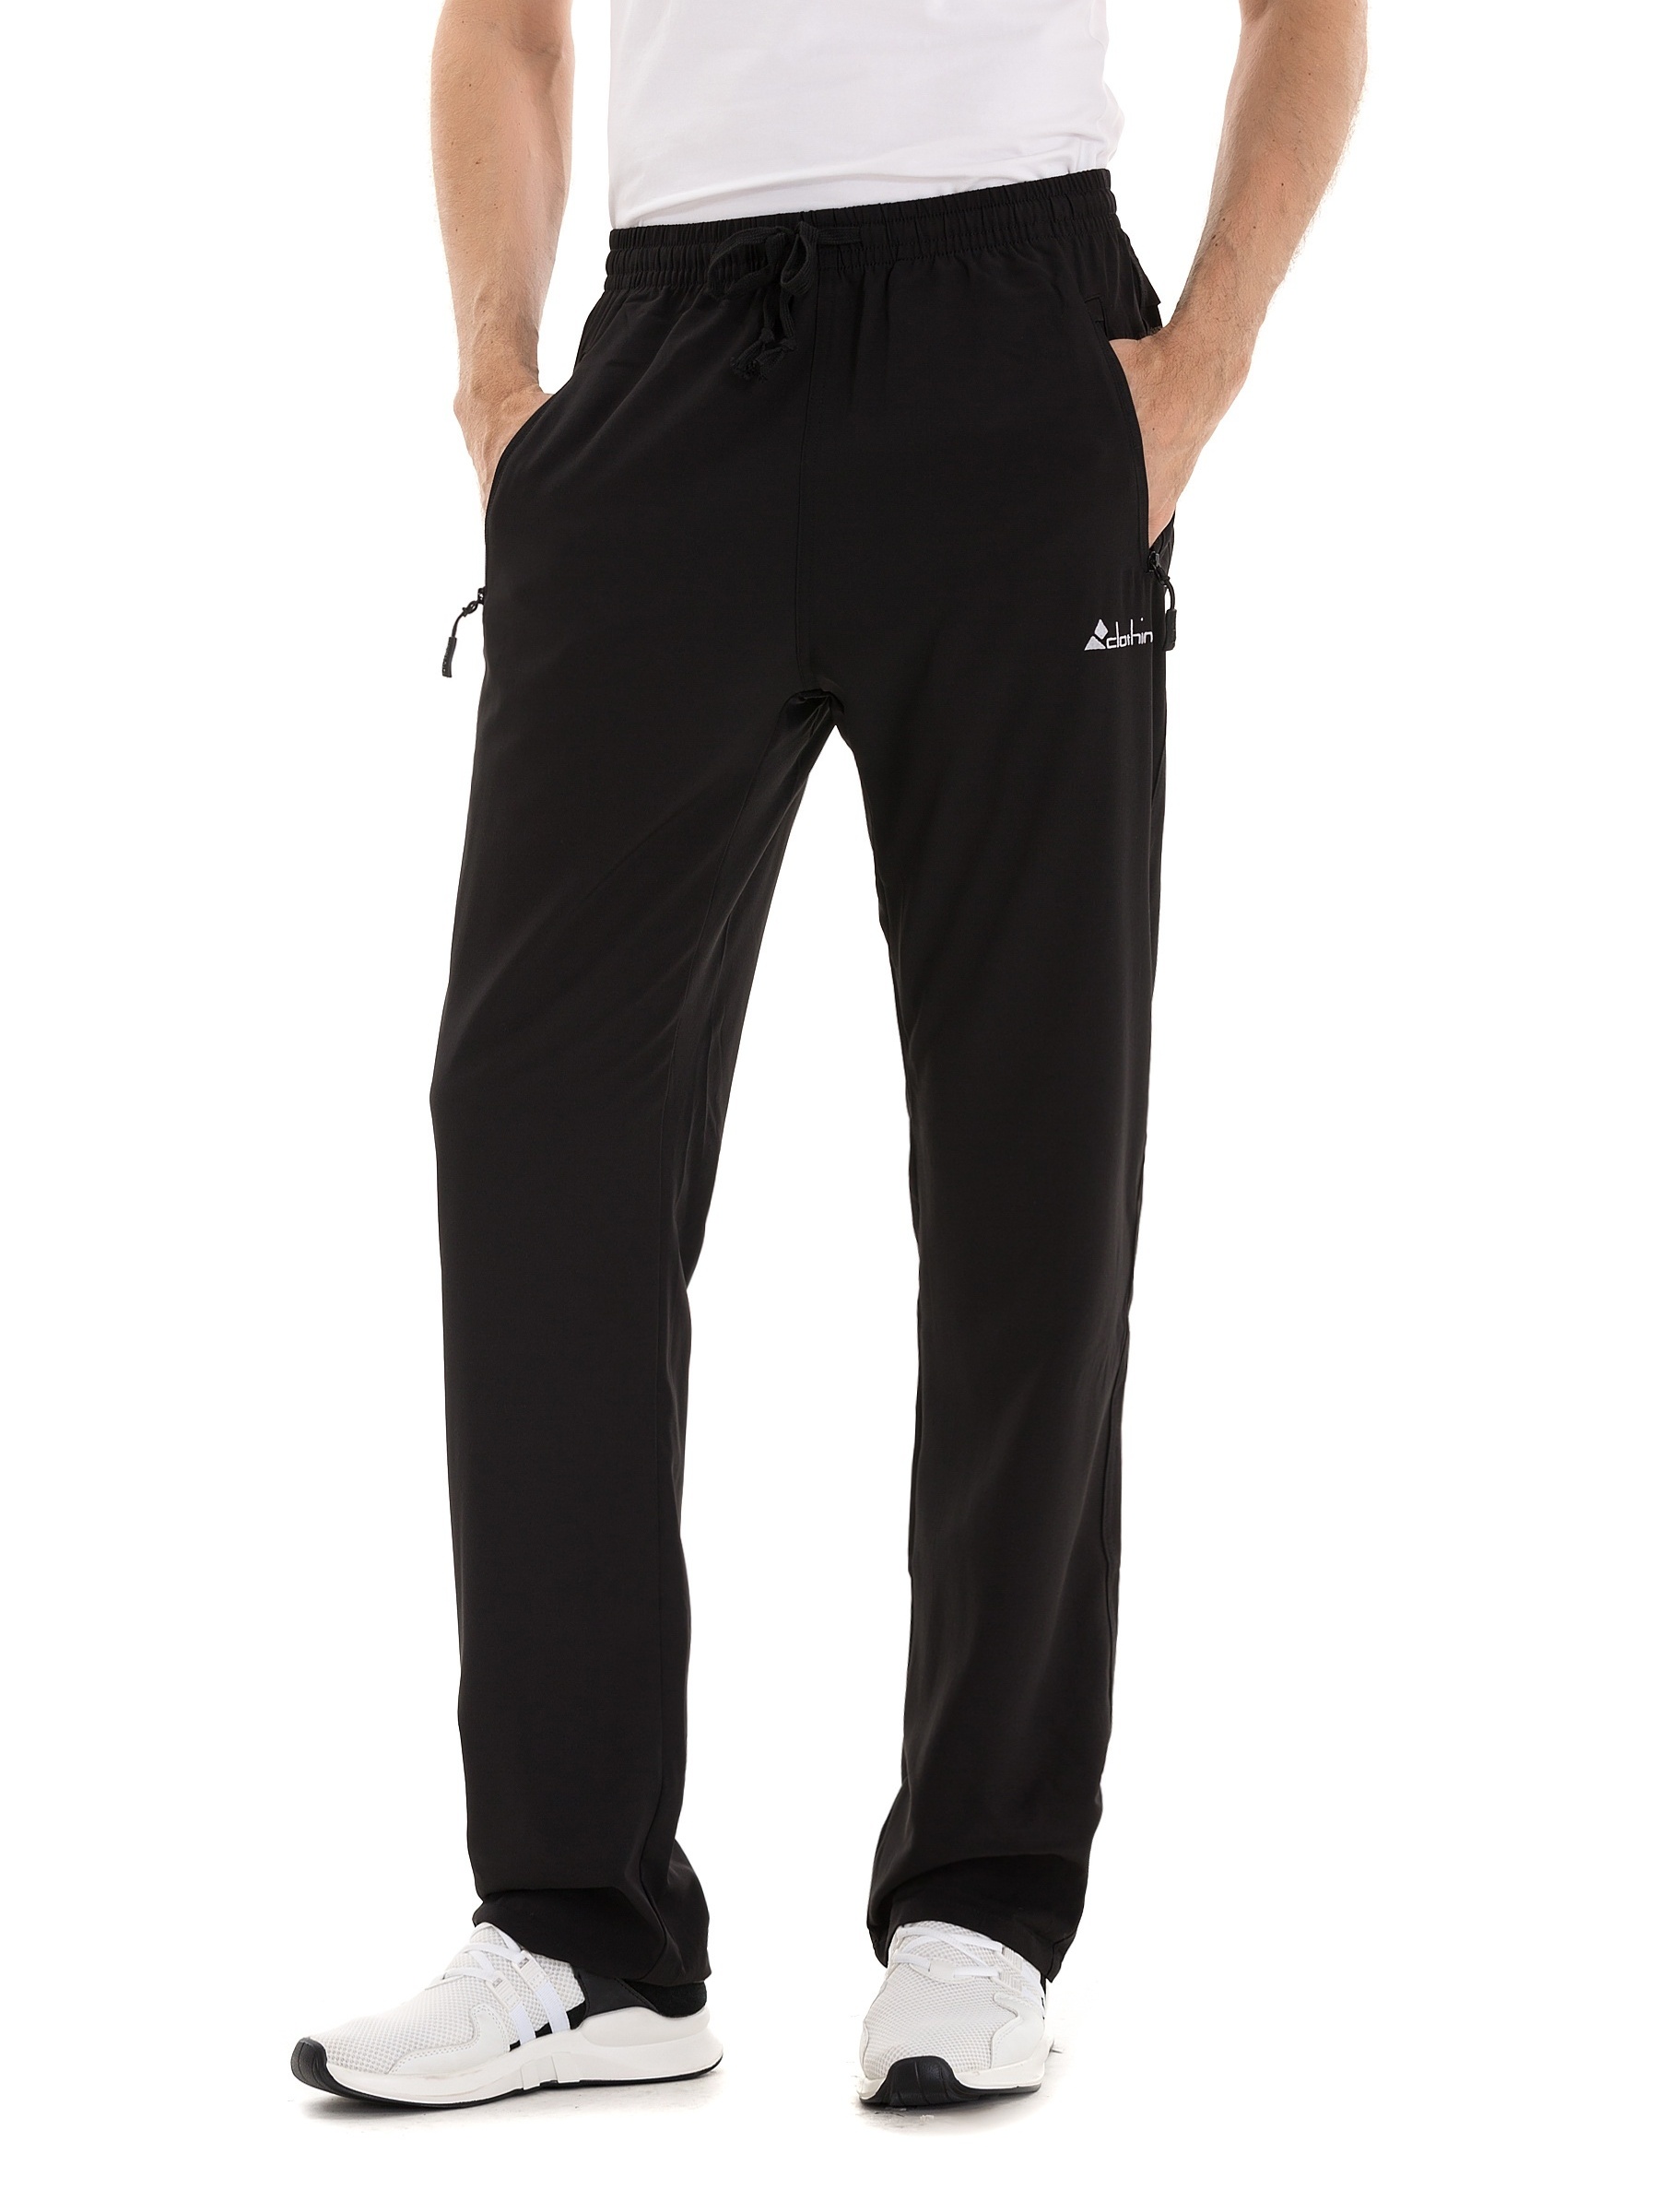 Lulus Yoga Men Pants Outfit Sport Quick Dry Drawstring Gym Pockets  Sweatpants Trousers Mens Casual Elastic Waist 1ihk Gym Pants For Men With  Pockets From Fashion21588, $14.94